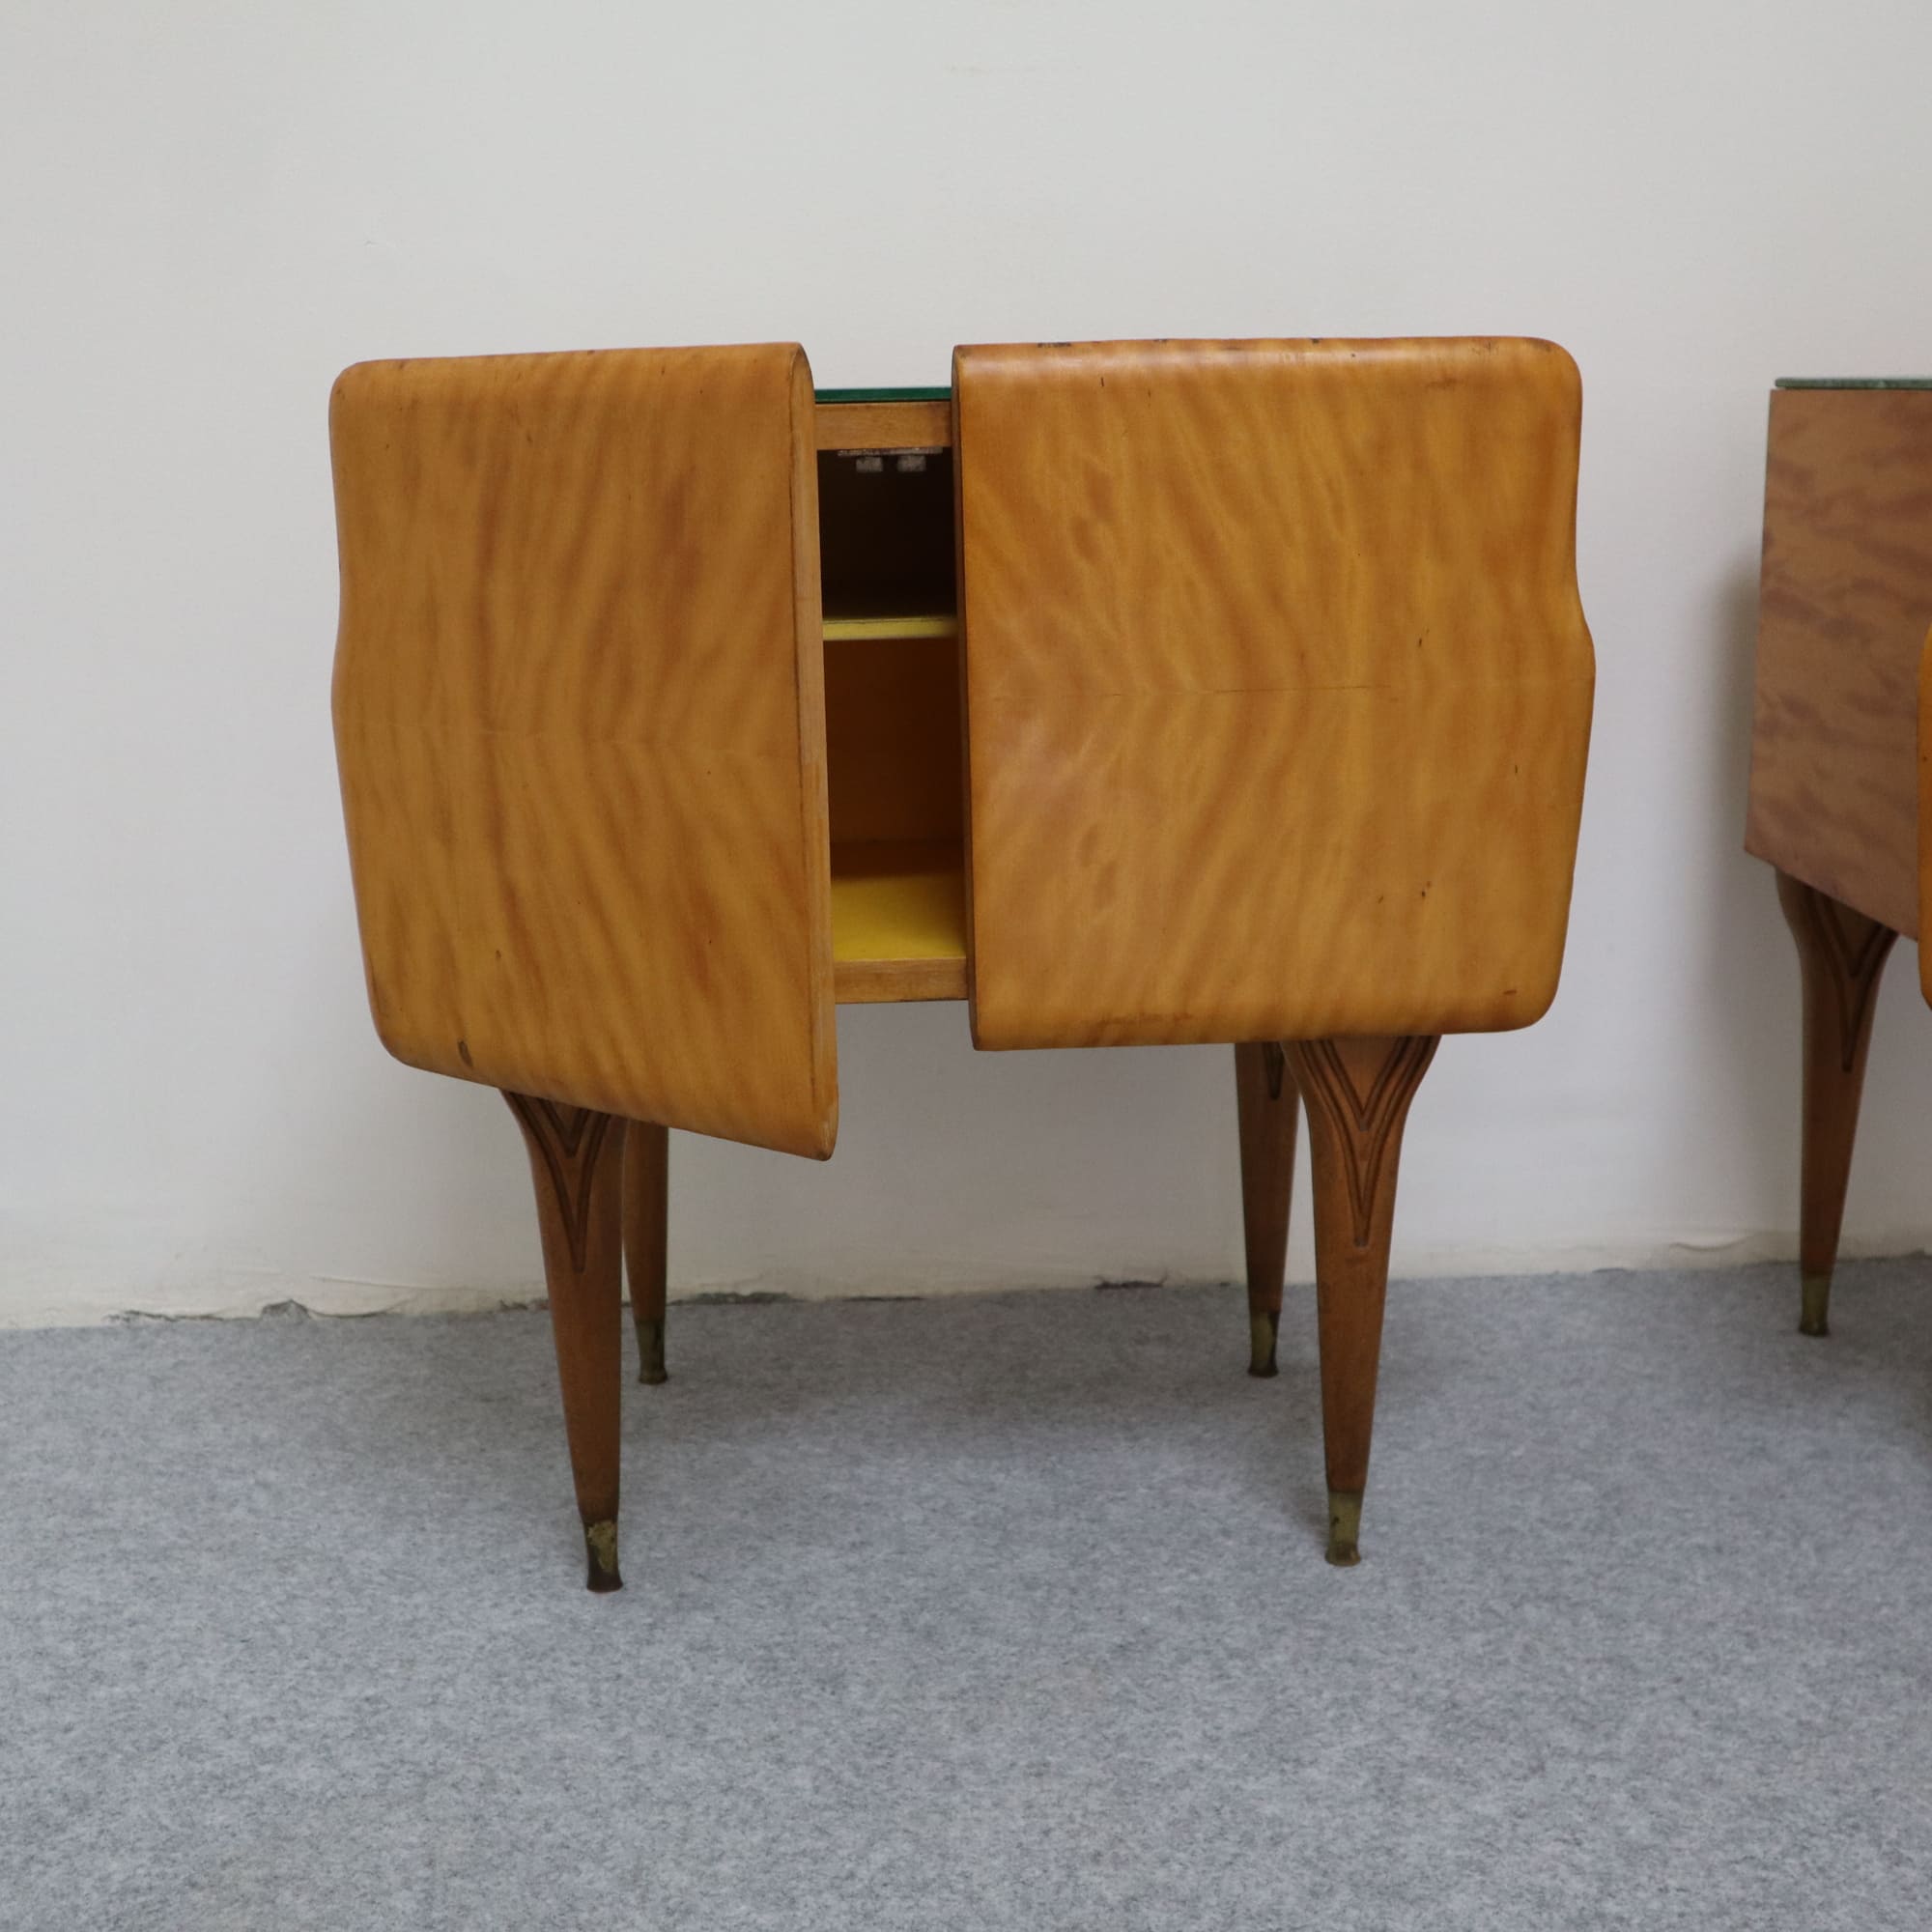 visionidepoca-modern-art-furniture-60s-vintage-bedside tables-with-butterfly-shaped-doors-in-maple-made-in-italy-opening-door